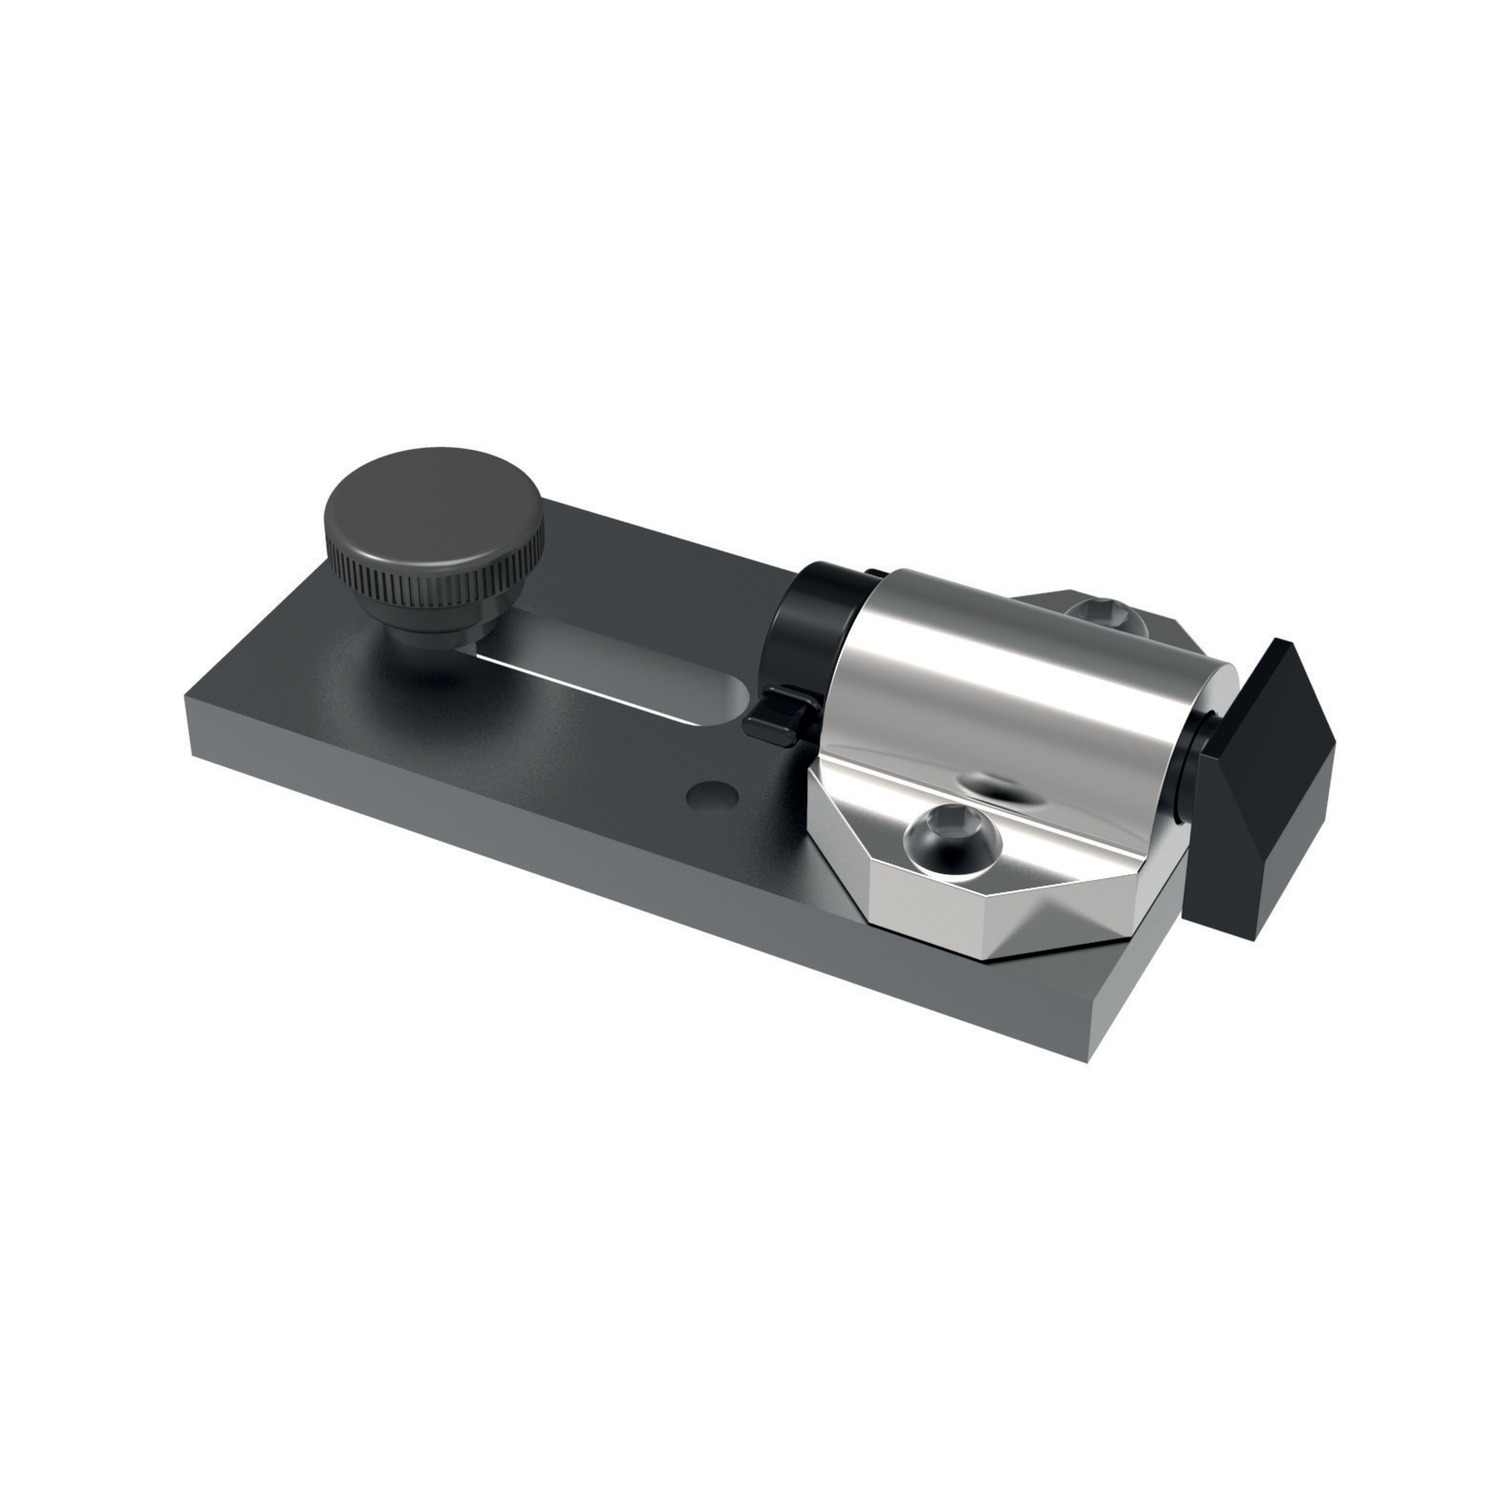 Product 19324, CMM Fixturing Stops with mounting plate / 